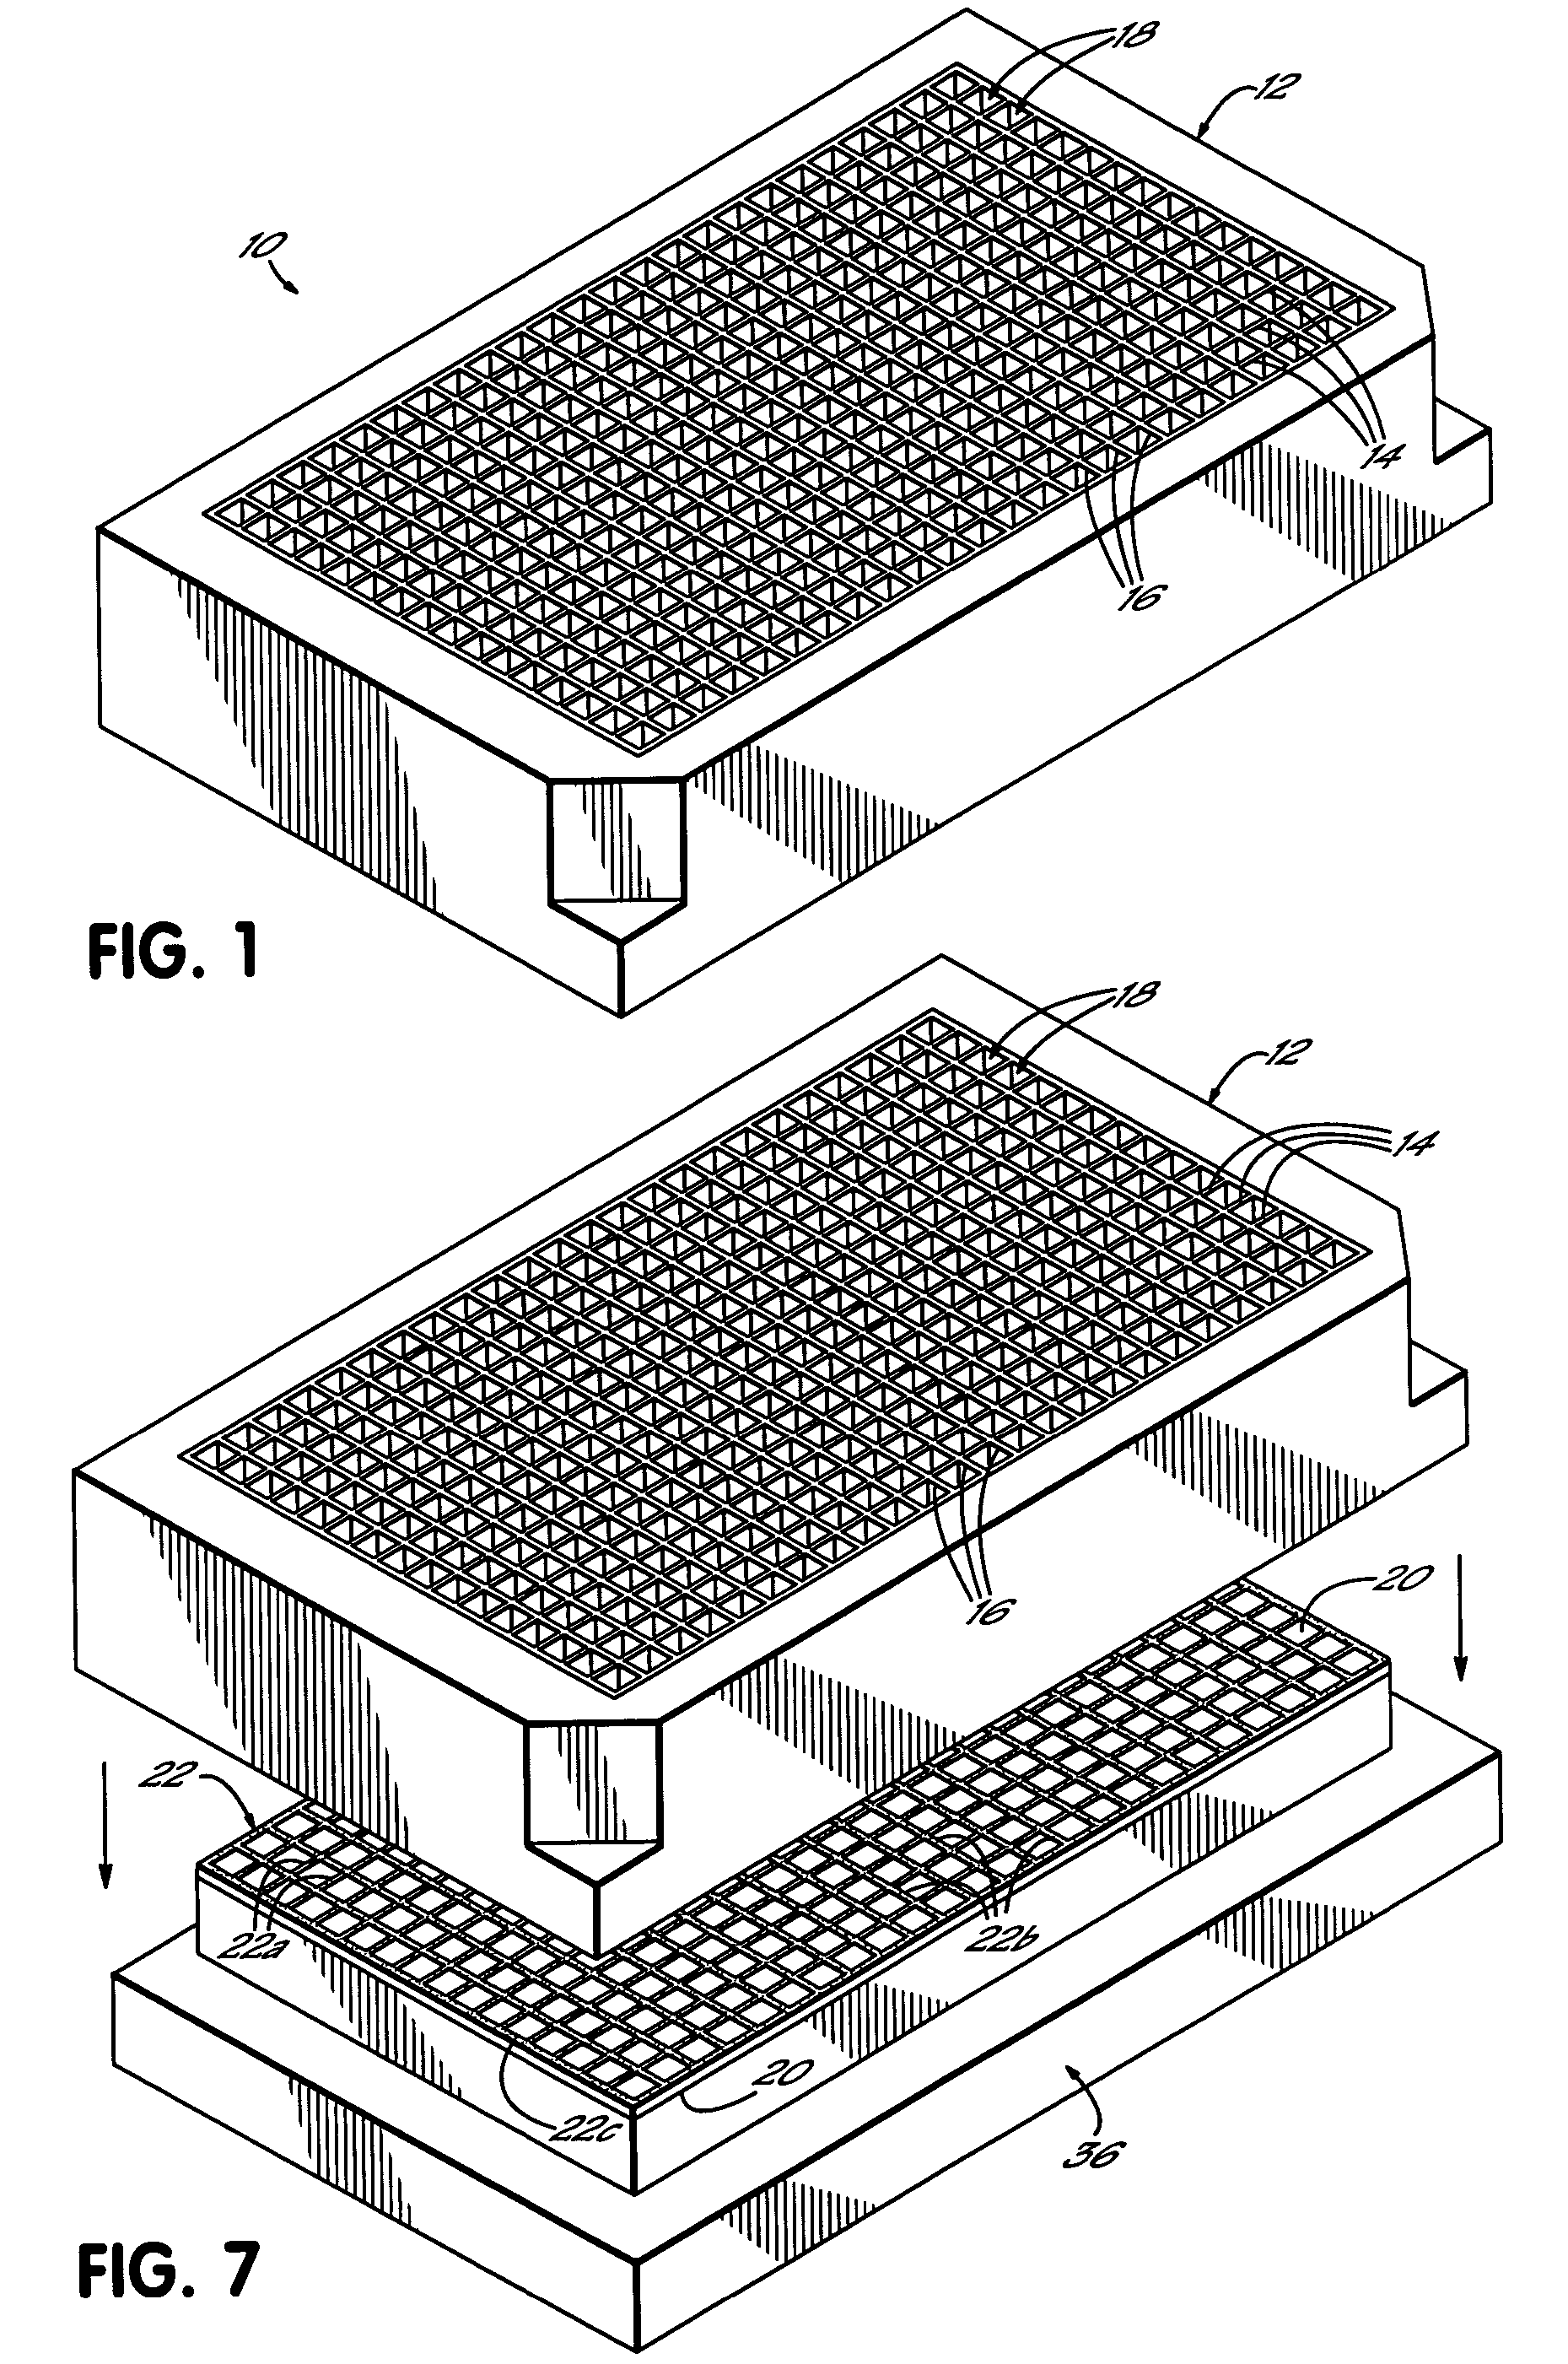 Method of making a multi-well test plate having adhesively secured transparent bottom panel